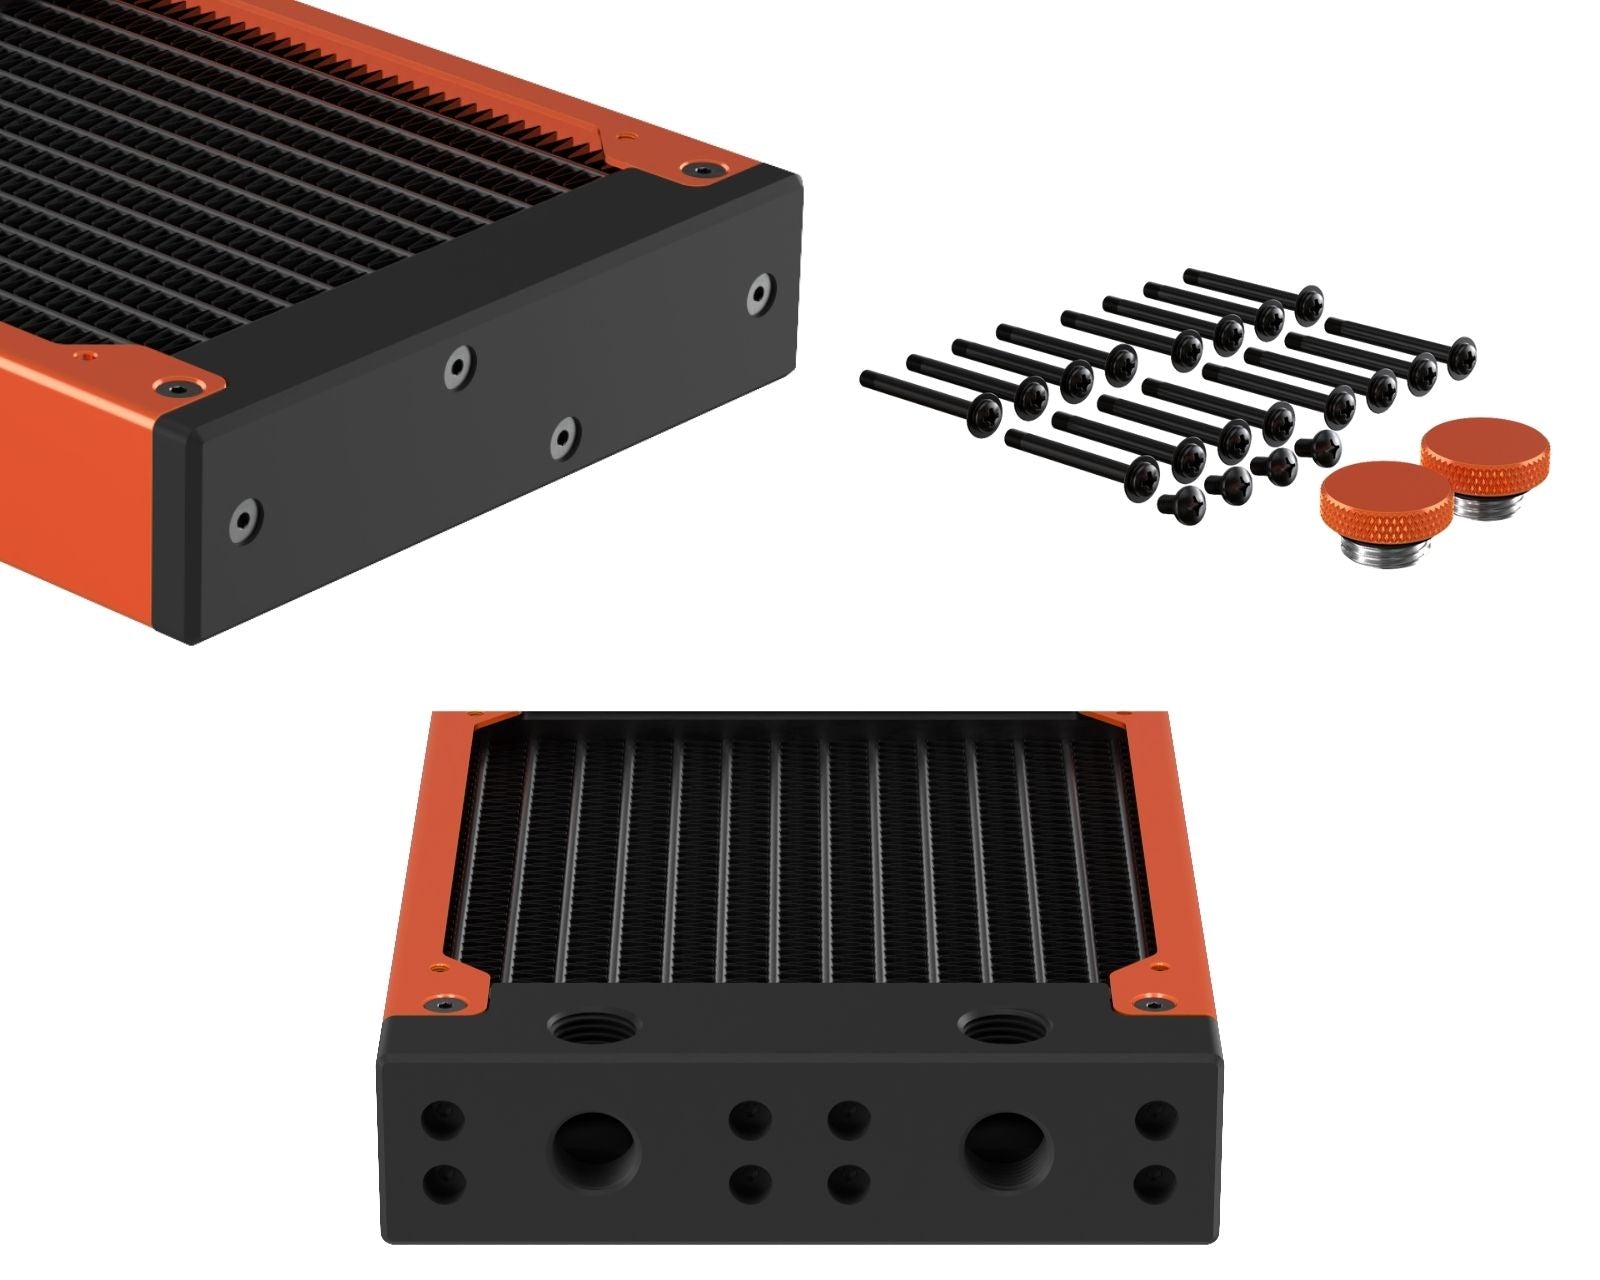 PrimoChill 480SL (30mm) EXIMO Modular Radiator, Black POM, 4x120mm, Quad Fan (R-SL-BK48) Available in 20+ Colors, Assembled in USA and Custom Watercooling Loop Ready - Candy Copper